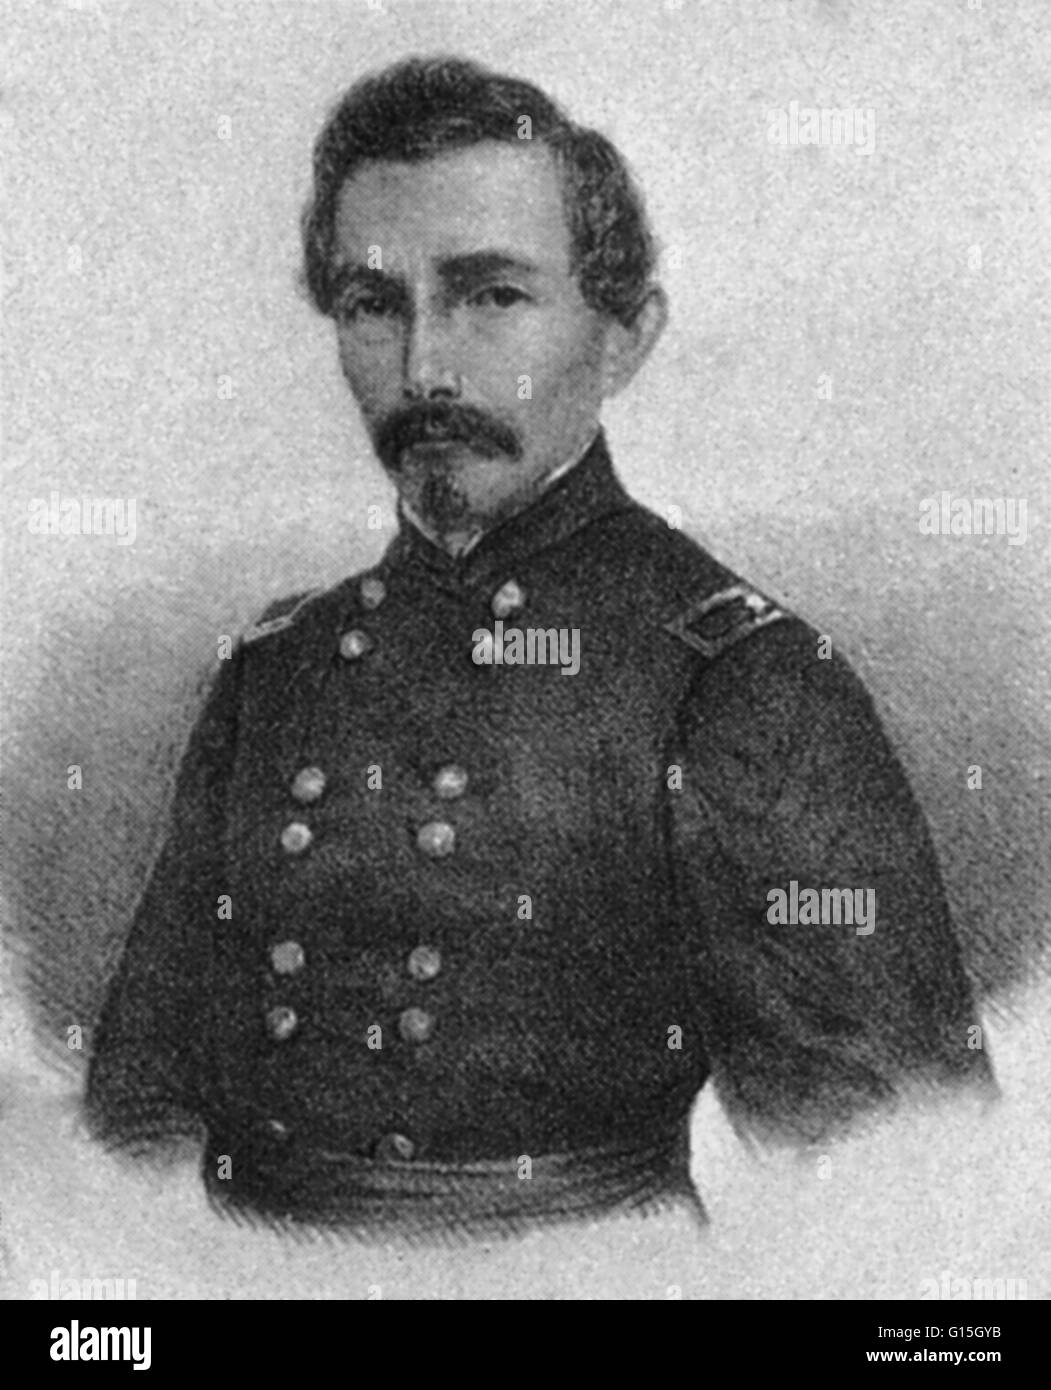 Pierre Gustave Toutant Beauregard (May 28, 1818 - February 20, 1893) was a Louisiana-born American military officer, politician, inventor, writer, civil servant, and the first prominent general of the Confederate States Army during the American Civil War. Stock Photo